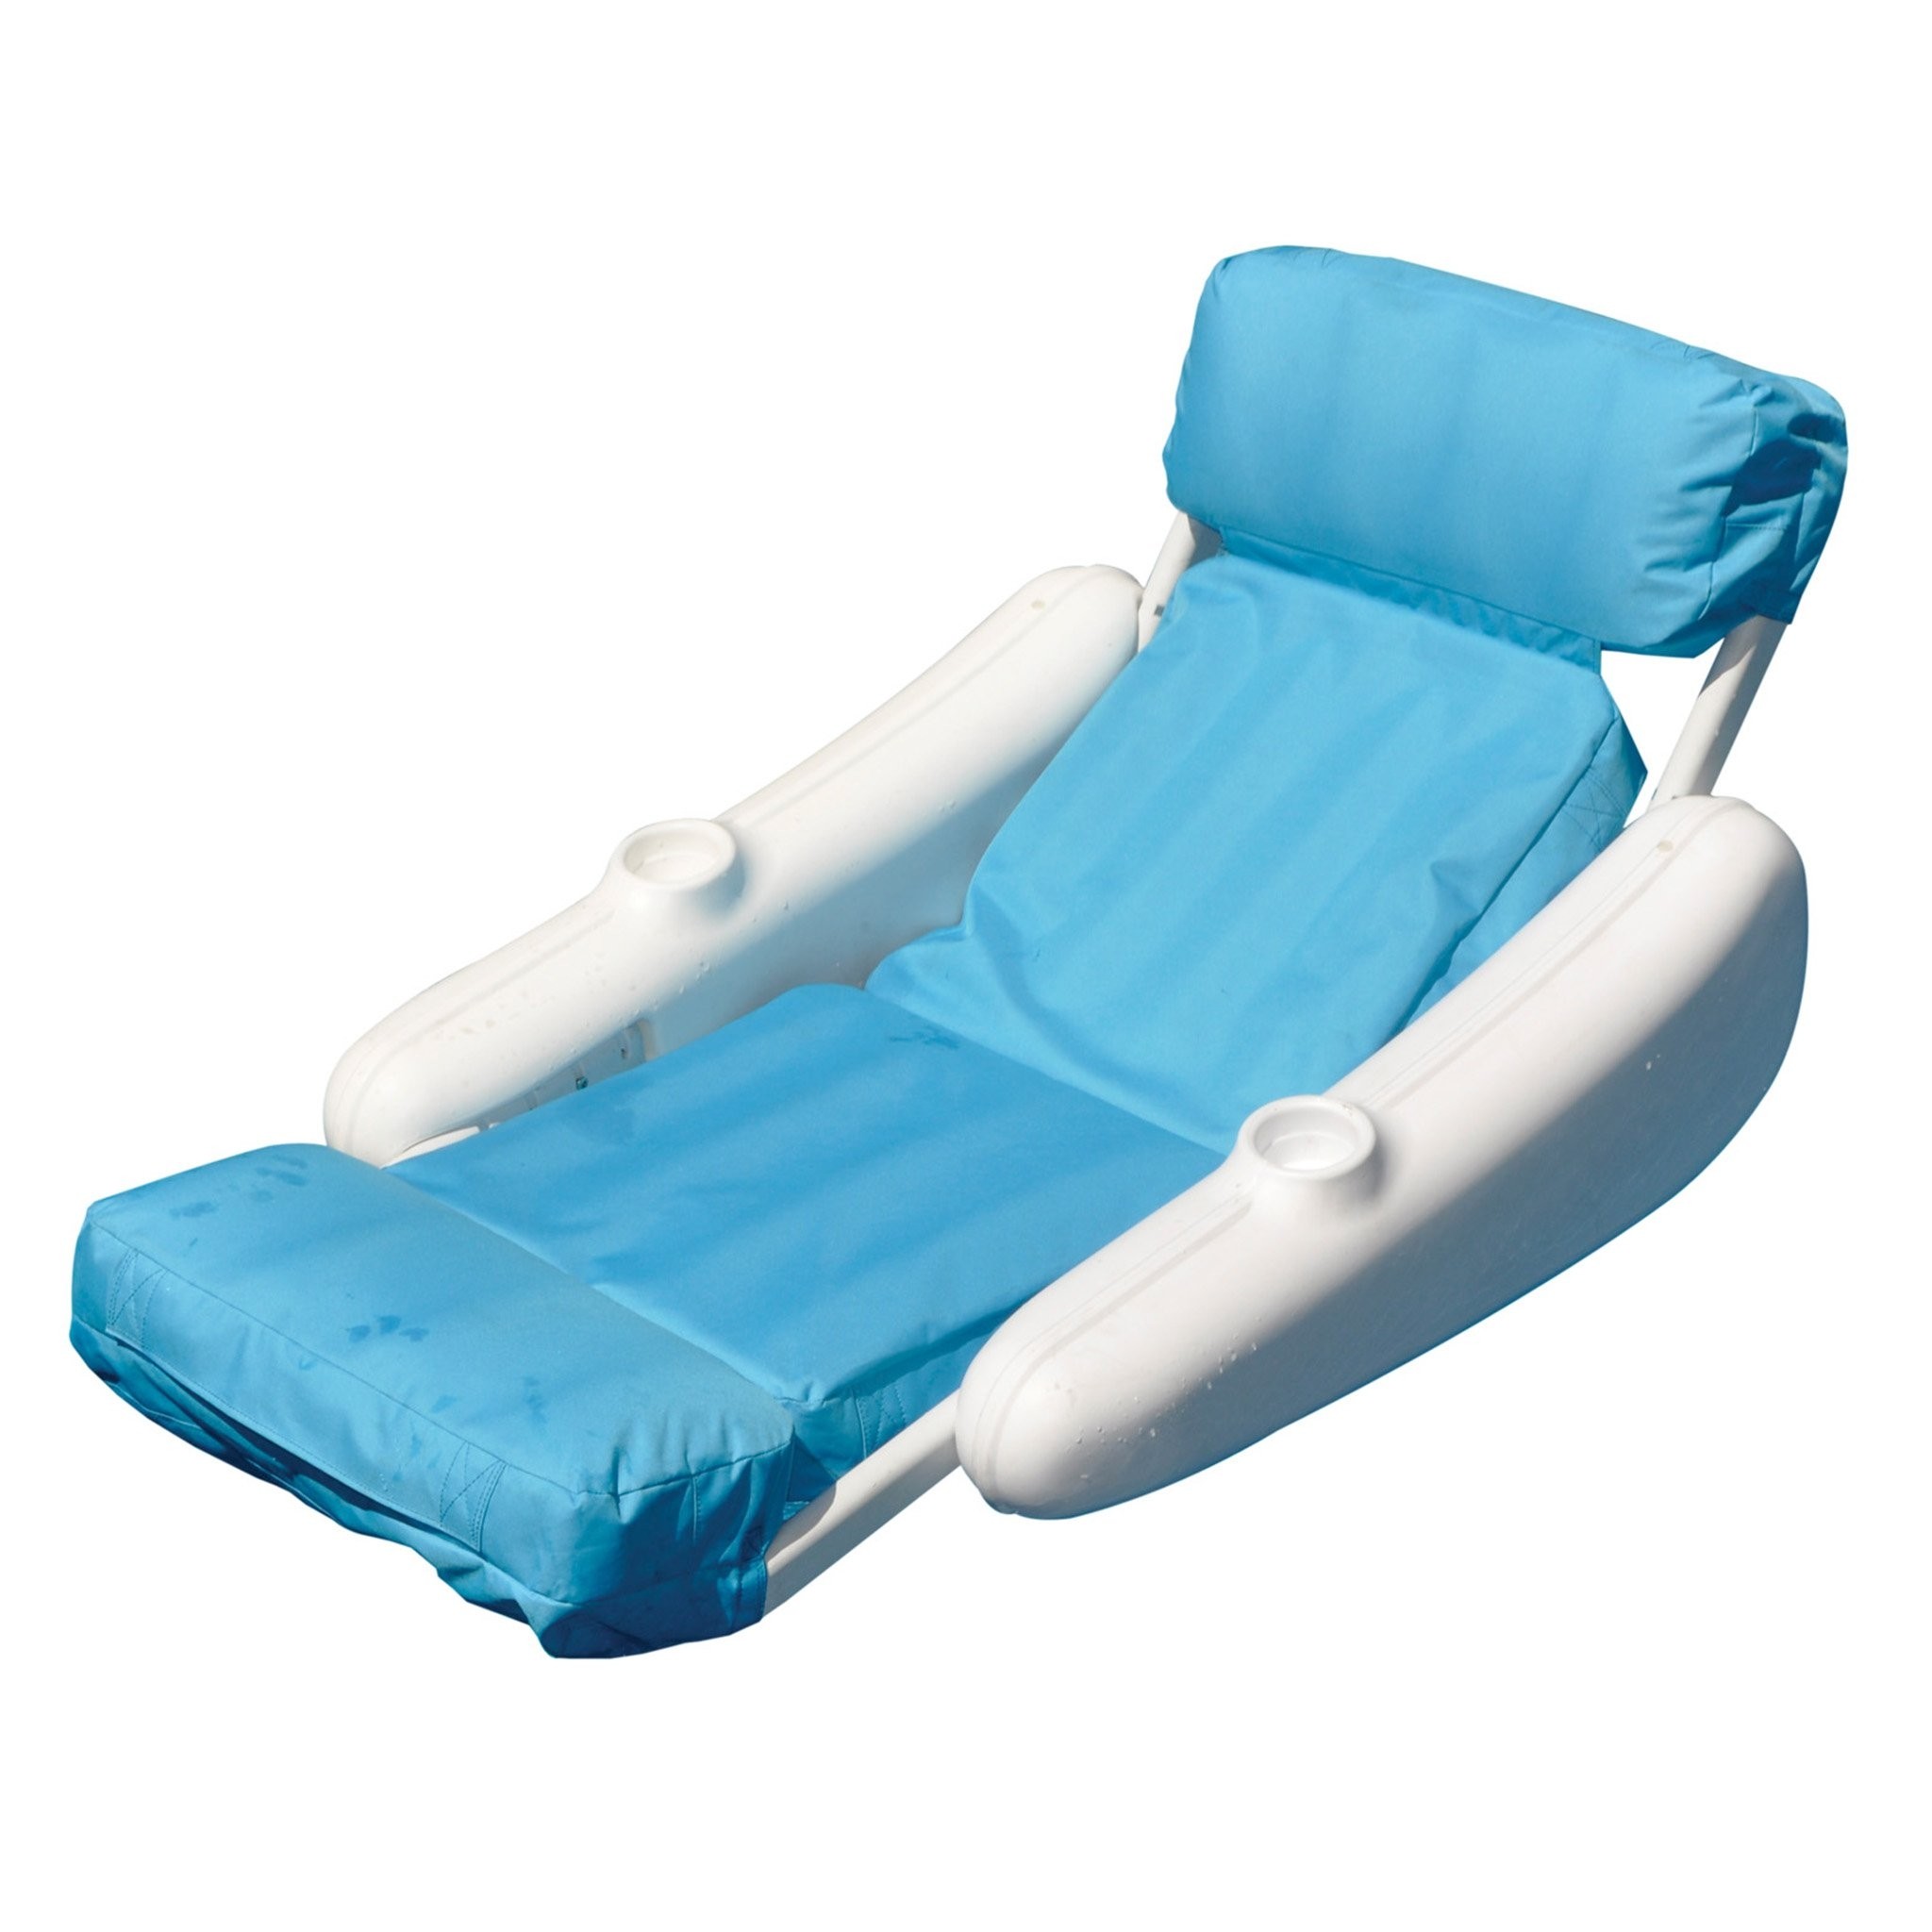 Outdoor Pool Float That Will Allow You to Soak up the Sun! This Swimming Pool Lounger Has an Adjustable Inflatable Cushion to Maximize Comfort. The Foam Arms Are Convenient to Carry a Drink or Sunscreen.